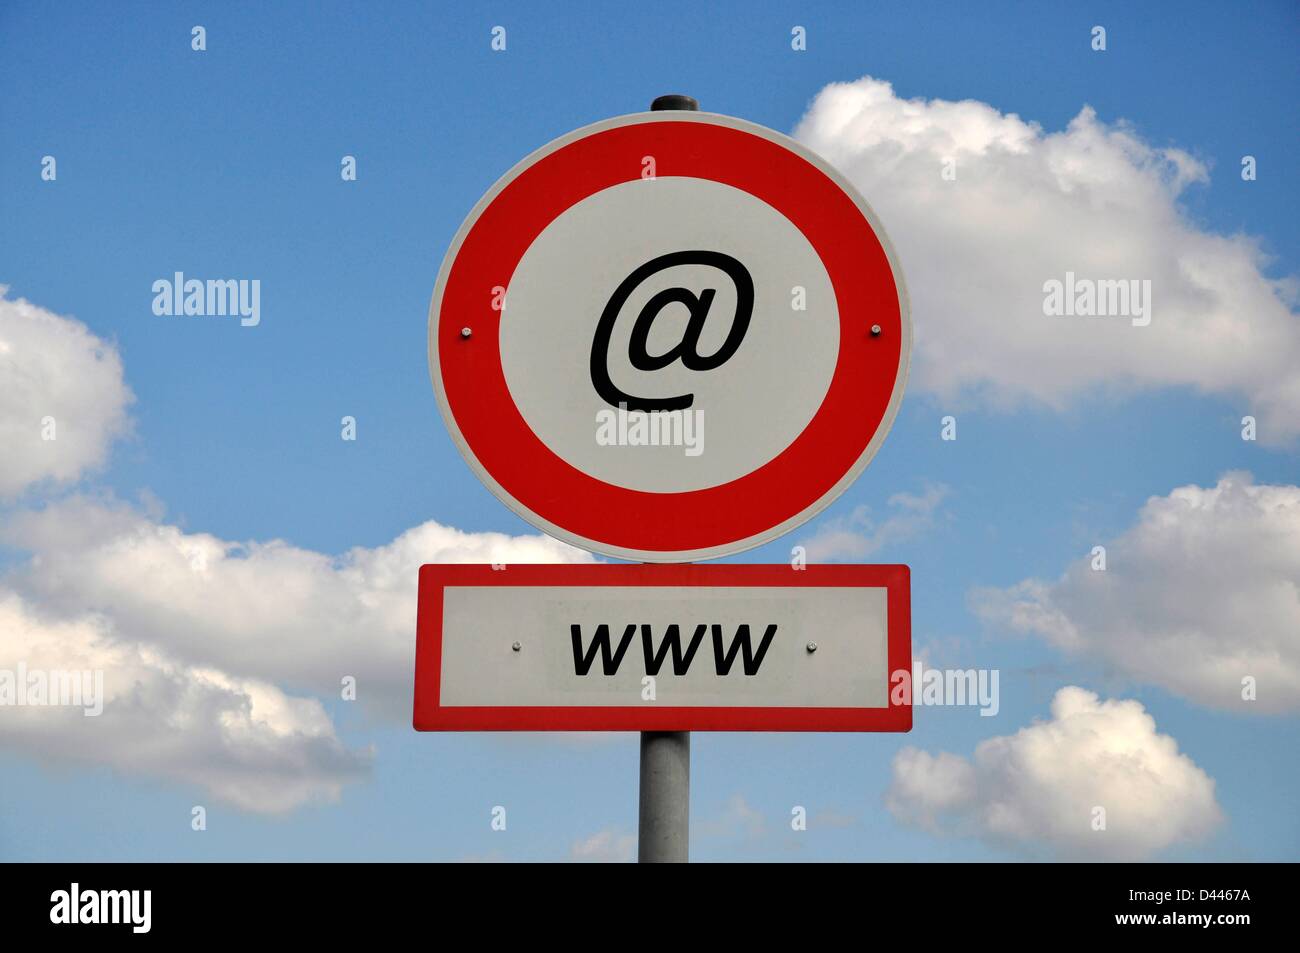 A prohibition sign shows the '@' sign and below it is another red sign reading 'www' in Berlin, Germany, 13 August 2011. Fotoarchiv für ZeitgeschichteS.Steinach Stock Photo